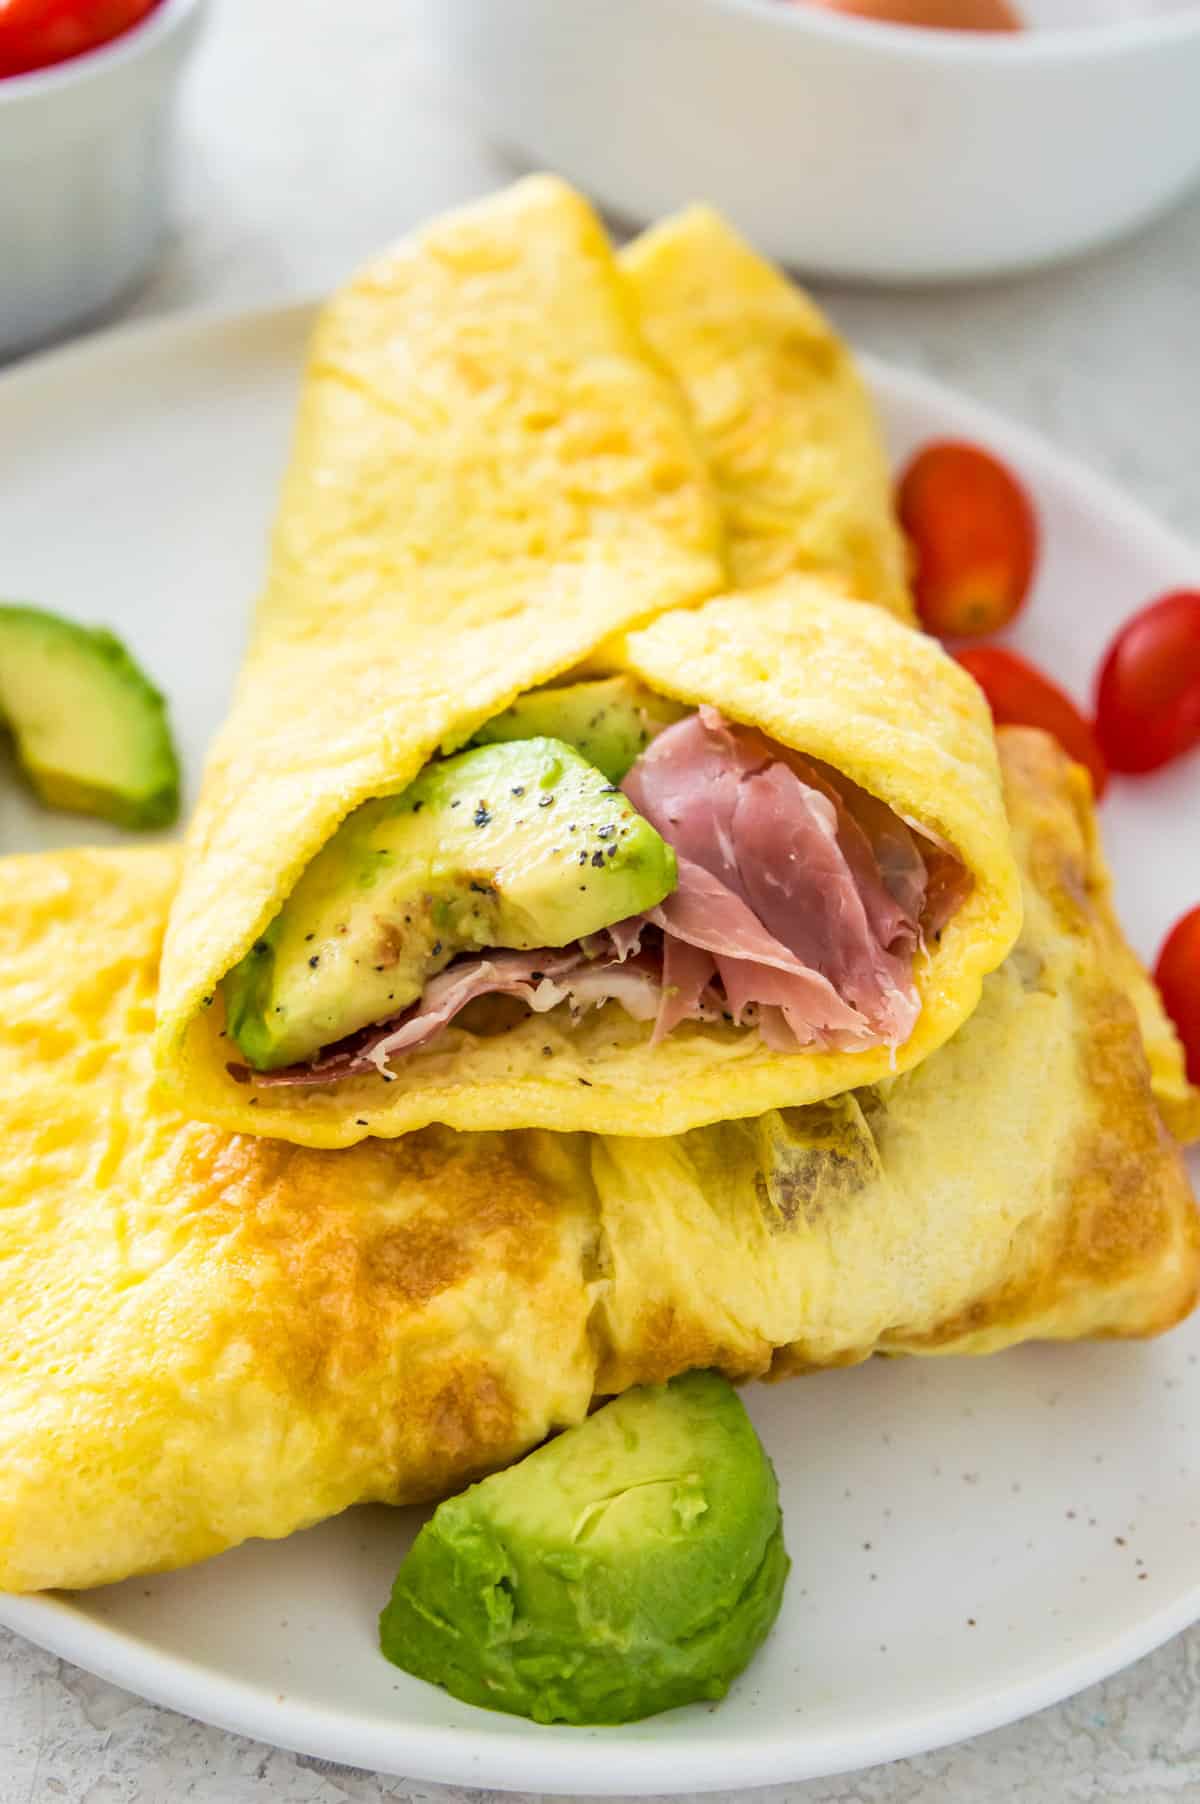 An egg wrap filled with sliced avocado and ham on a plate with baby tomatoes.